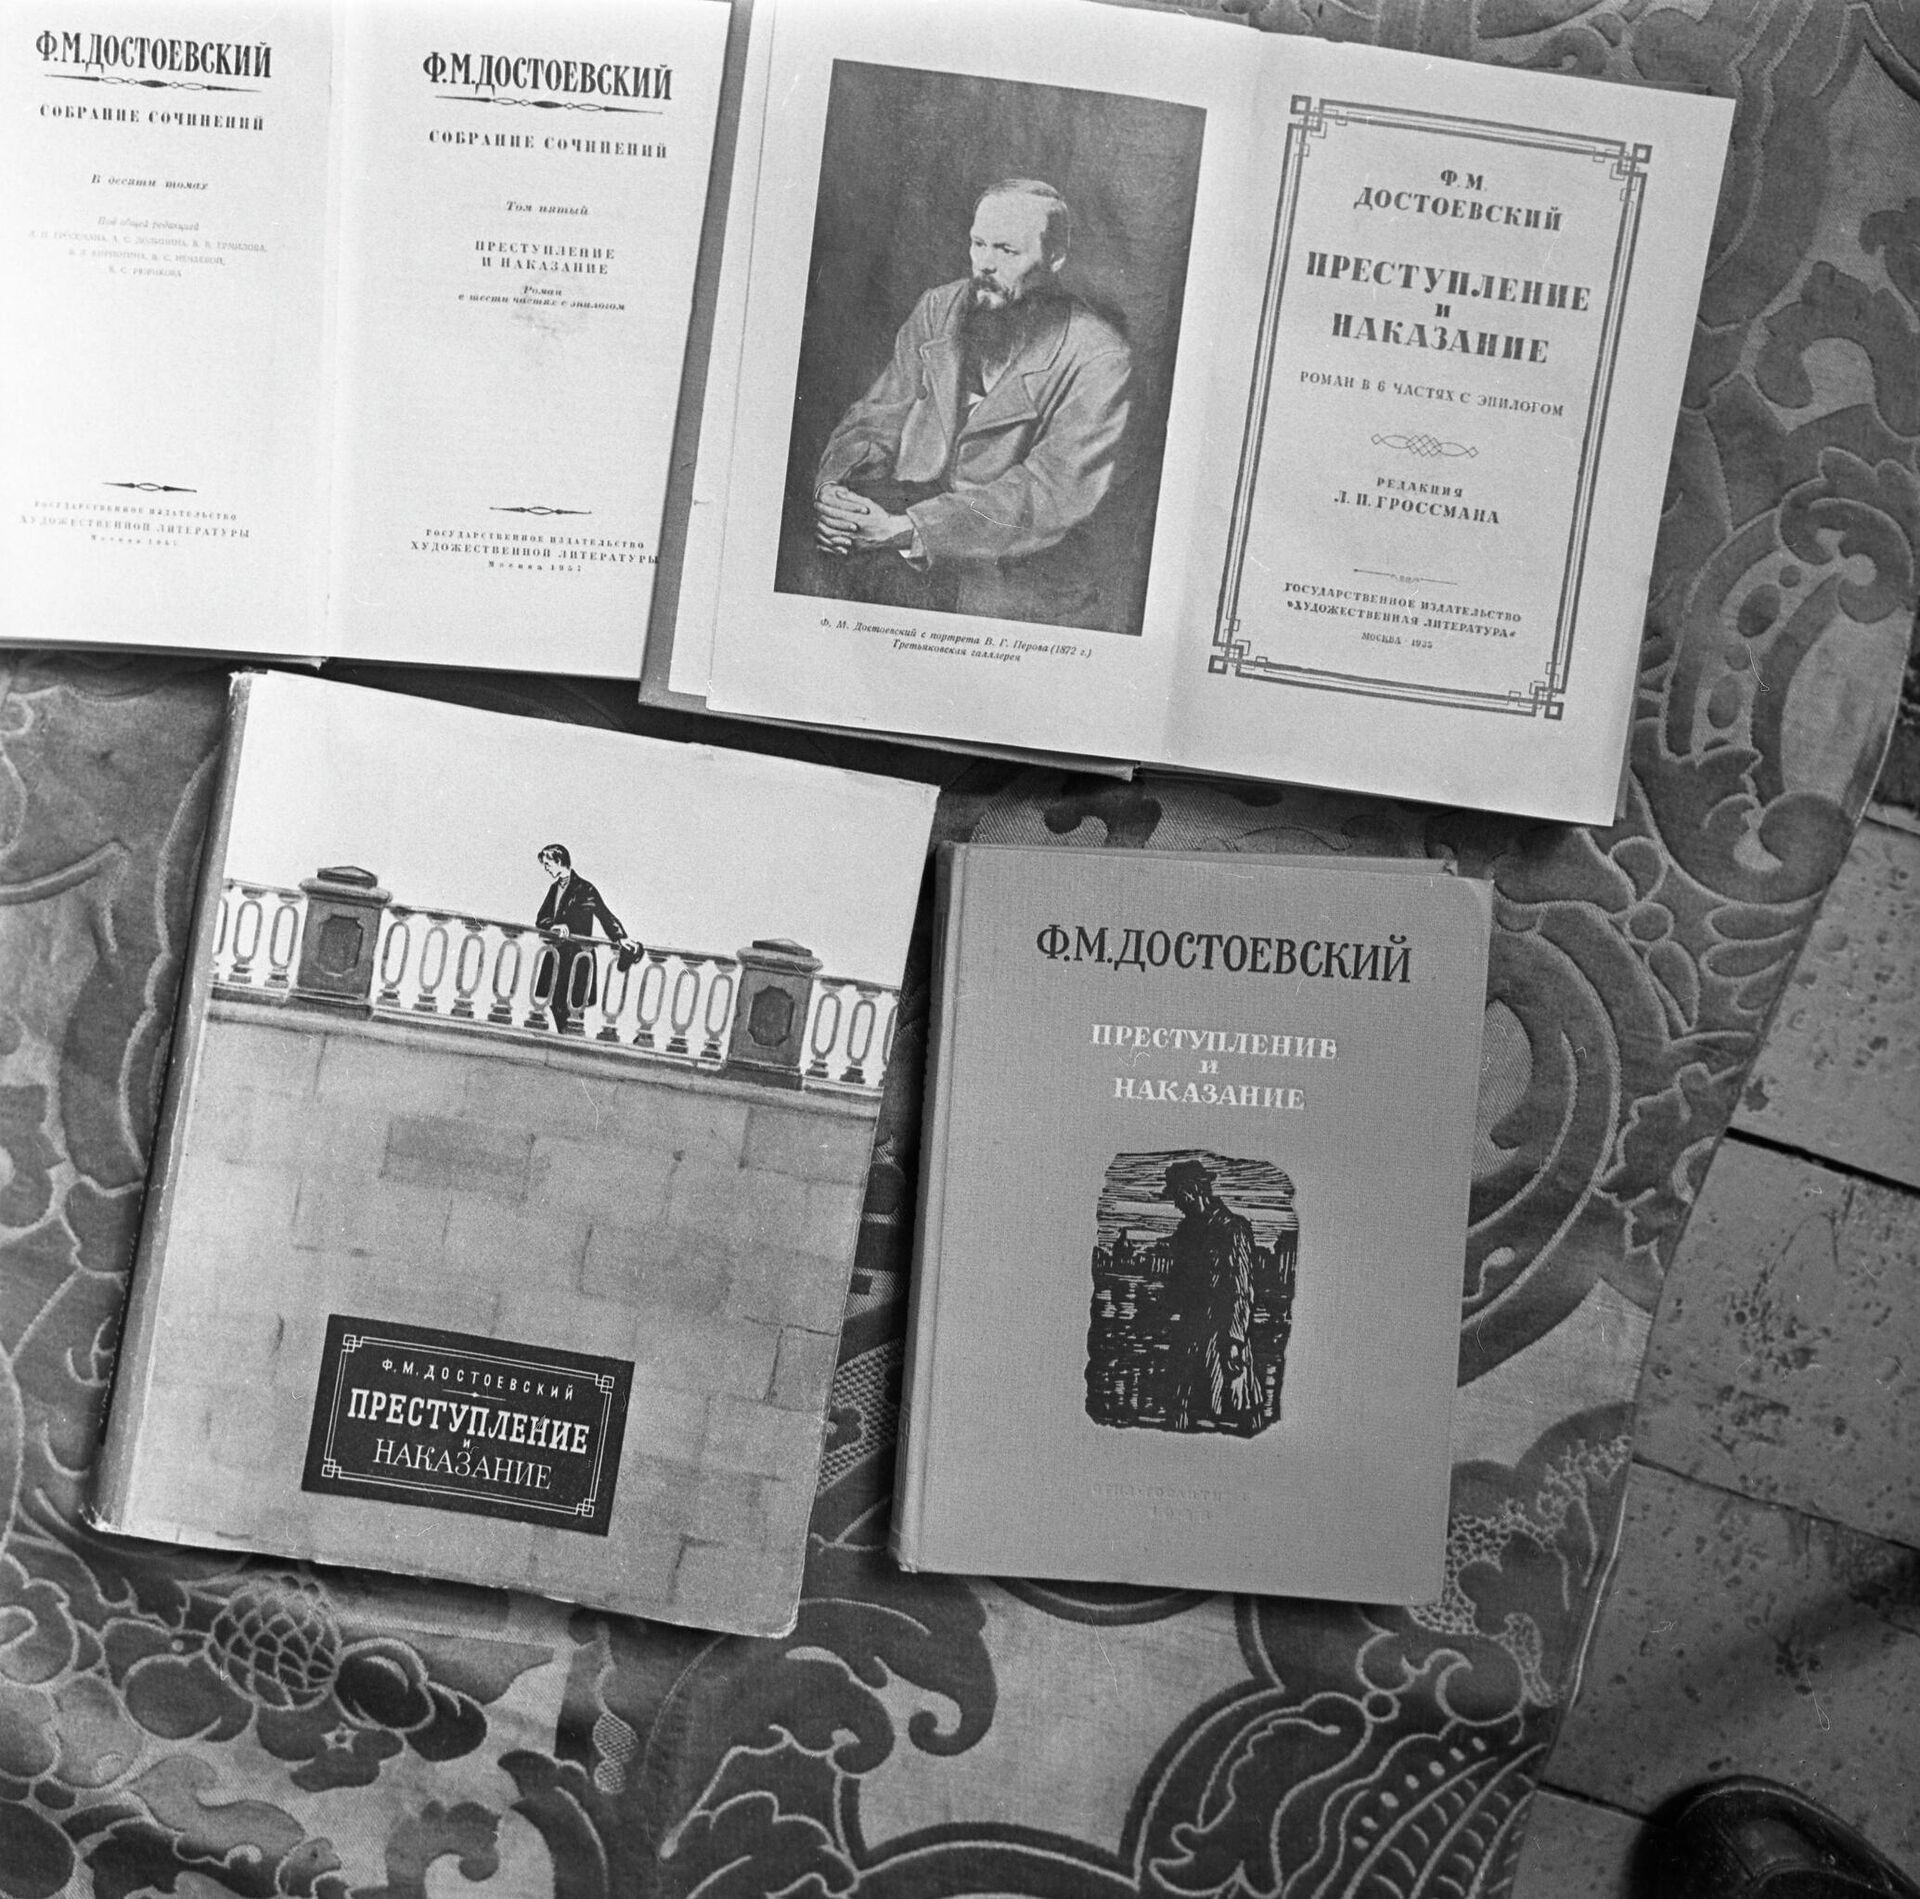 Editions of the novel Crime and Punishment by Fyodor Dostoevsky from the museum-apartment of Fyodor Dostoevsky in Moscow - Sputnik International, 1920, 11.11.2021